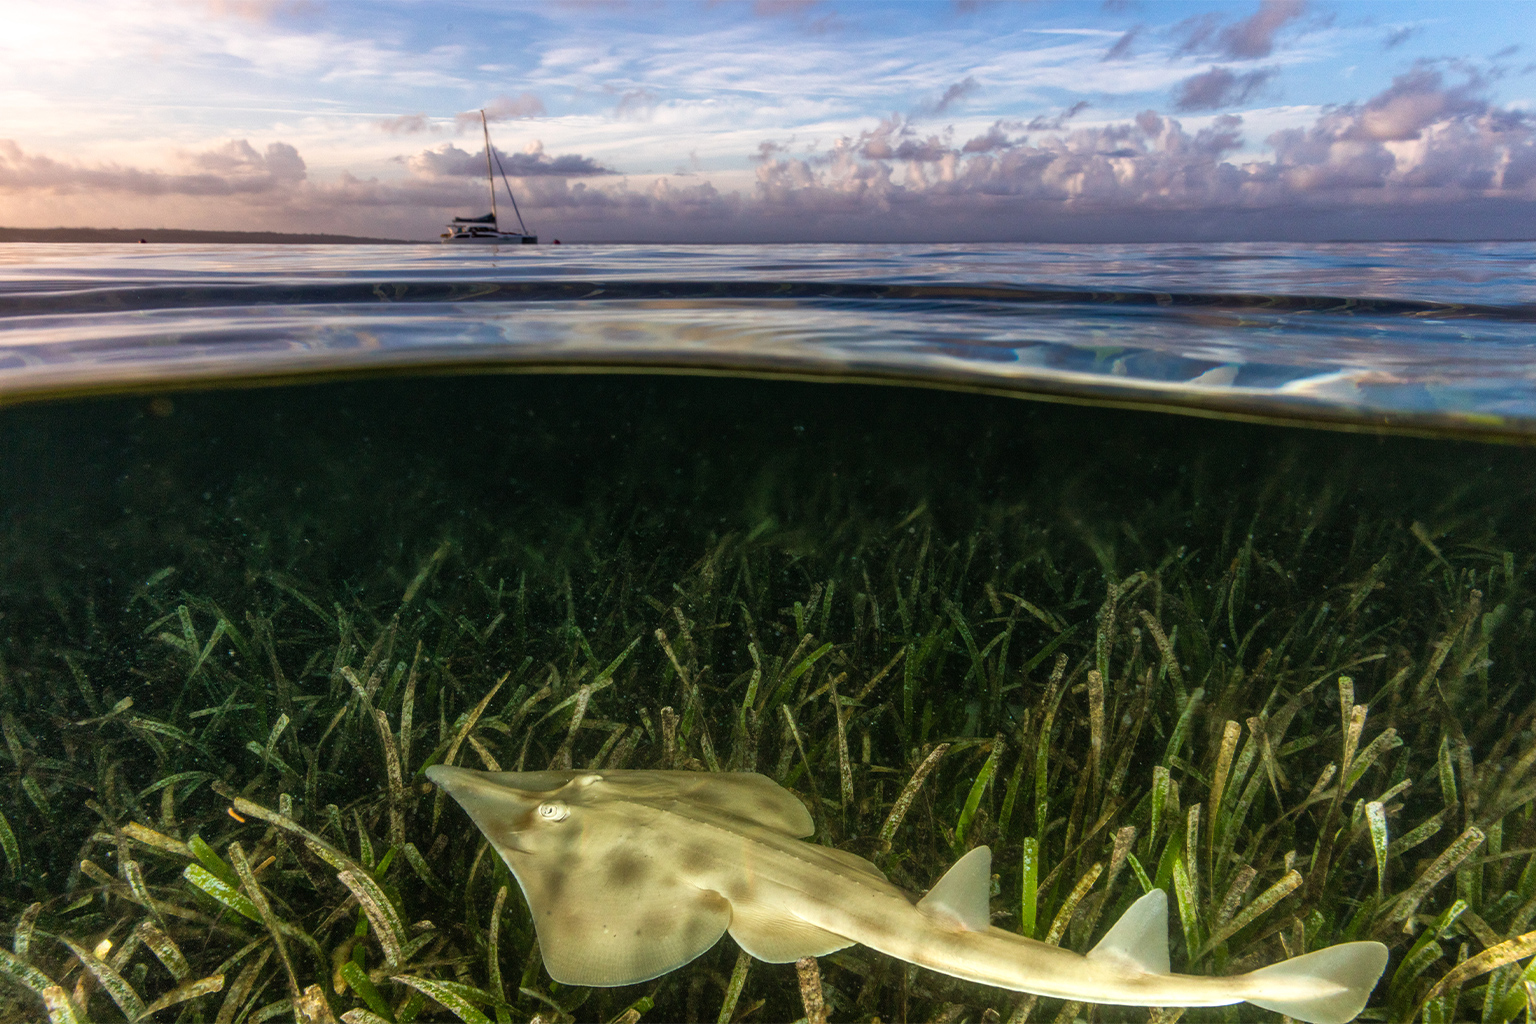 A ray amidst seagrass.